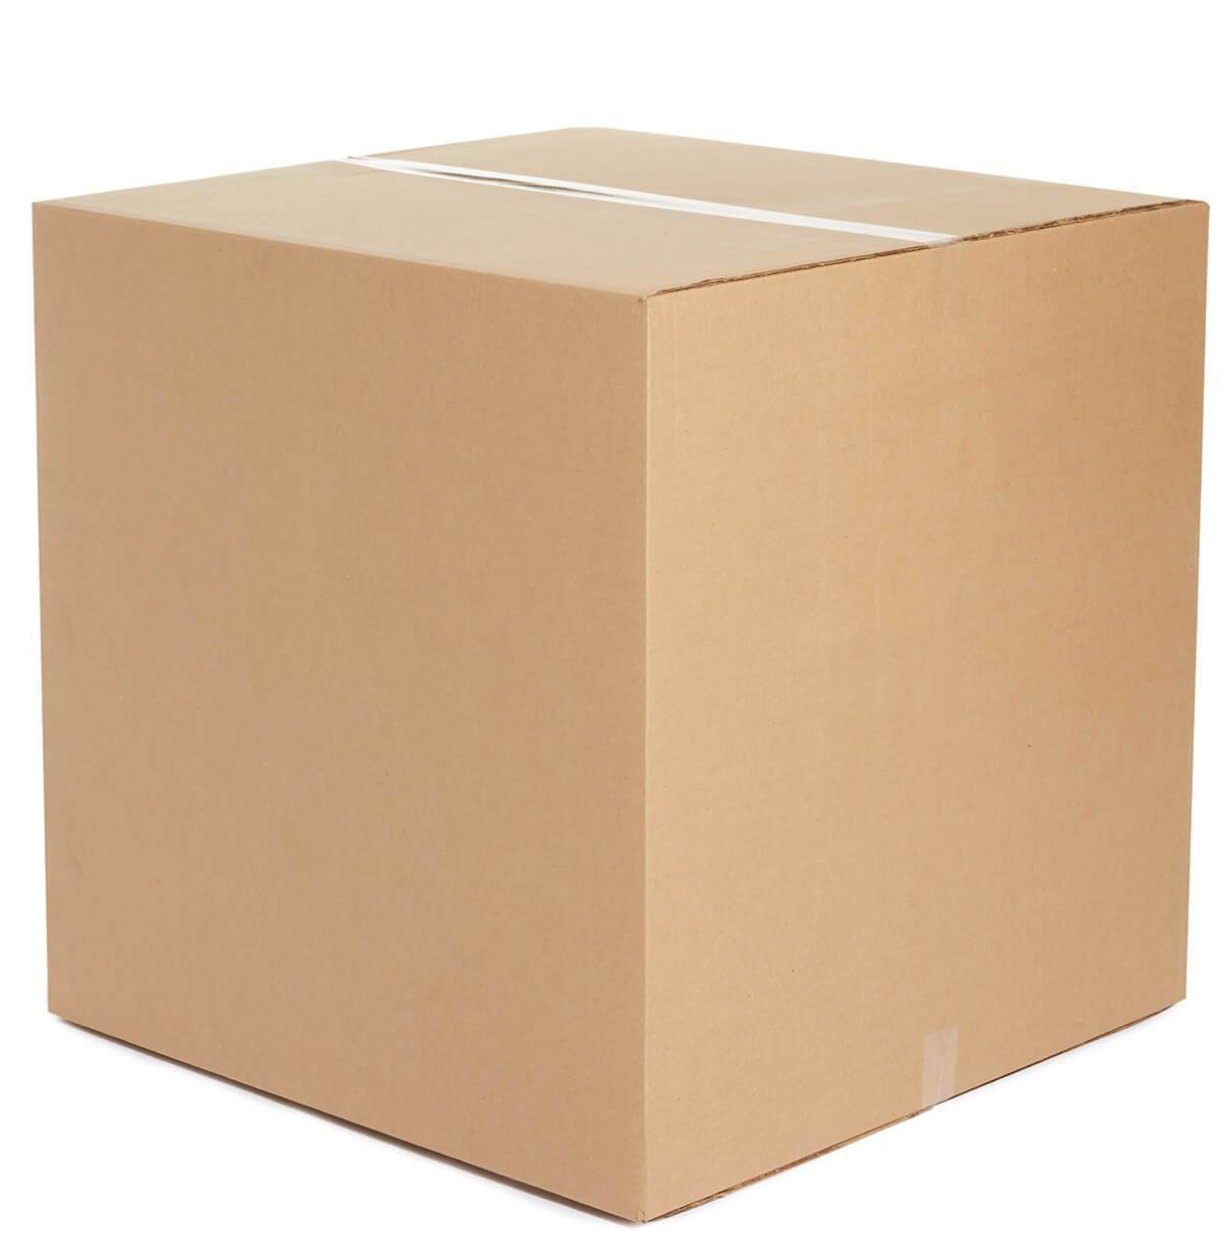 Heavy Duty Box Extra Large Box Moving Boxes Double Walled Moving